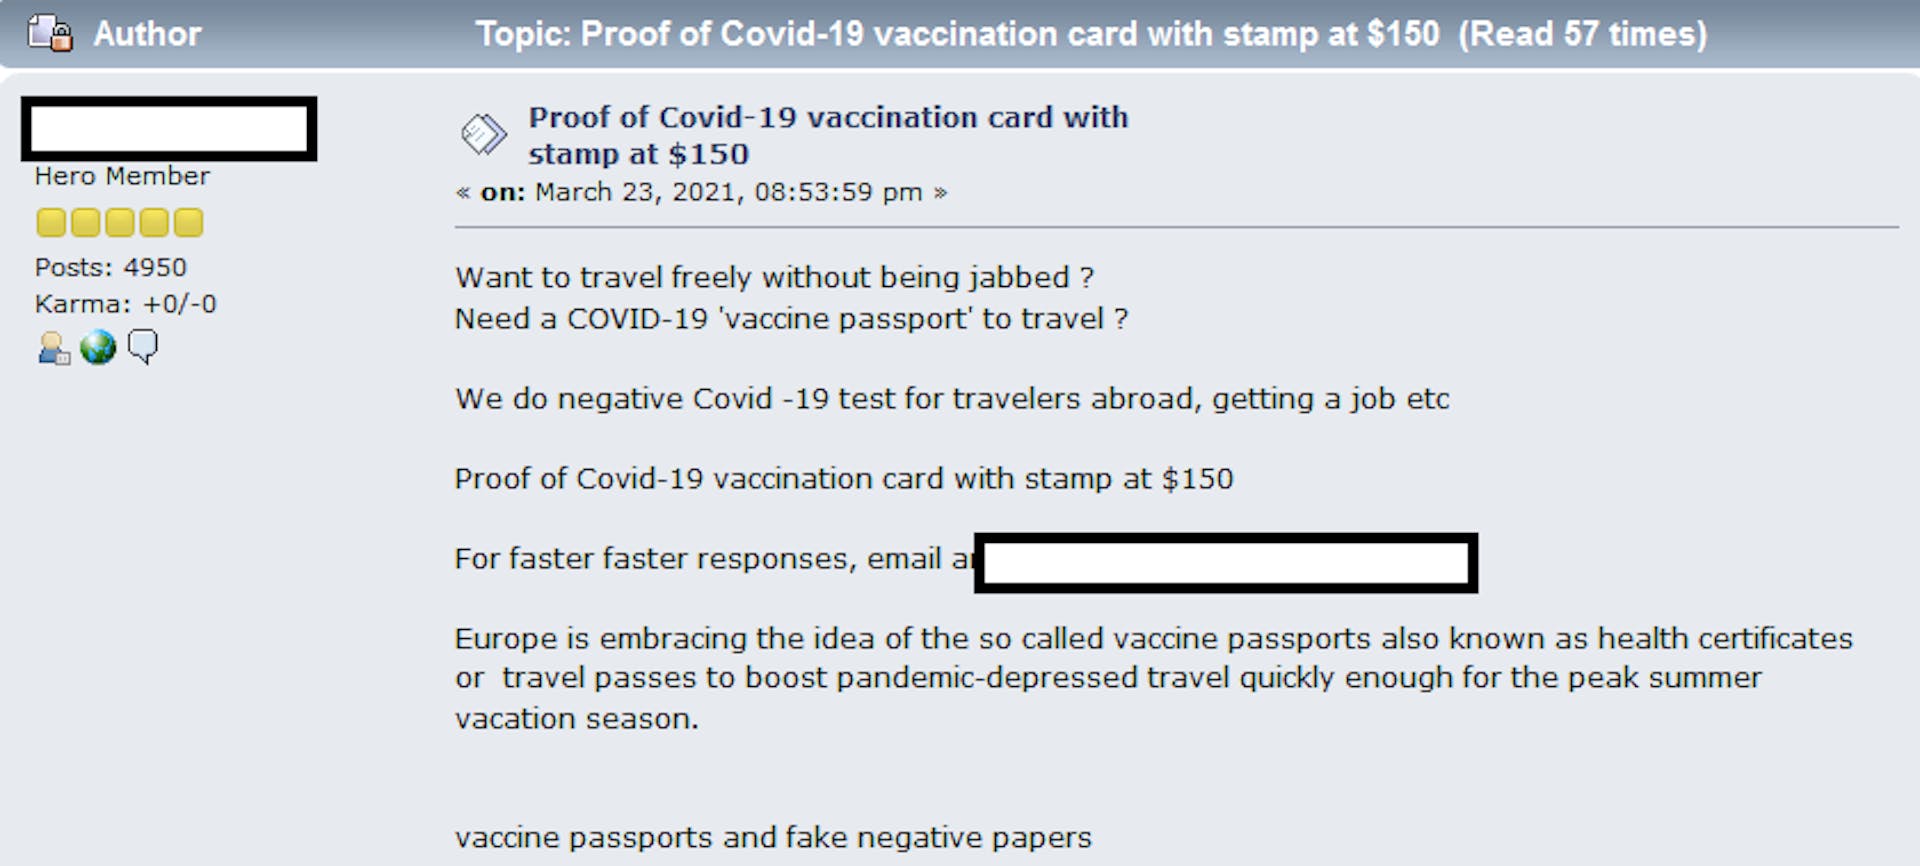 Selling COVID-19 vaccination cards and negative test papers